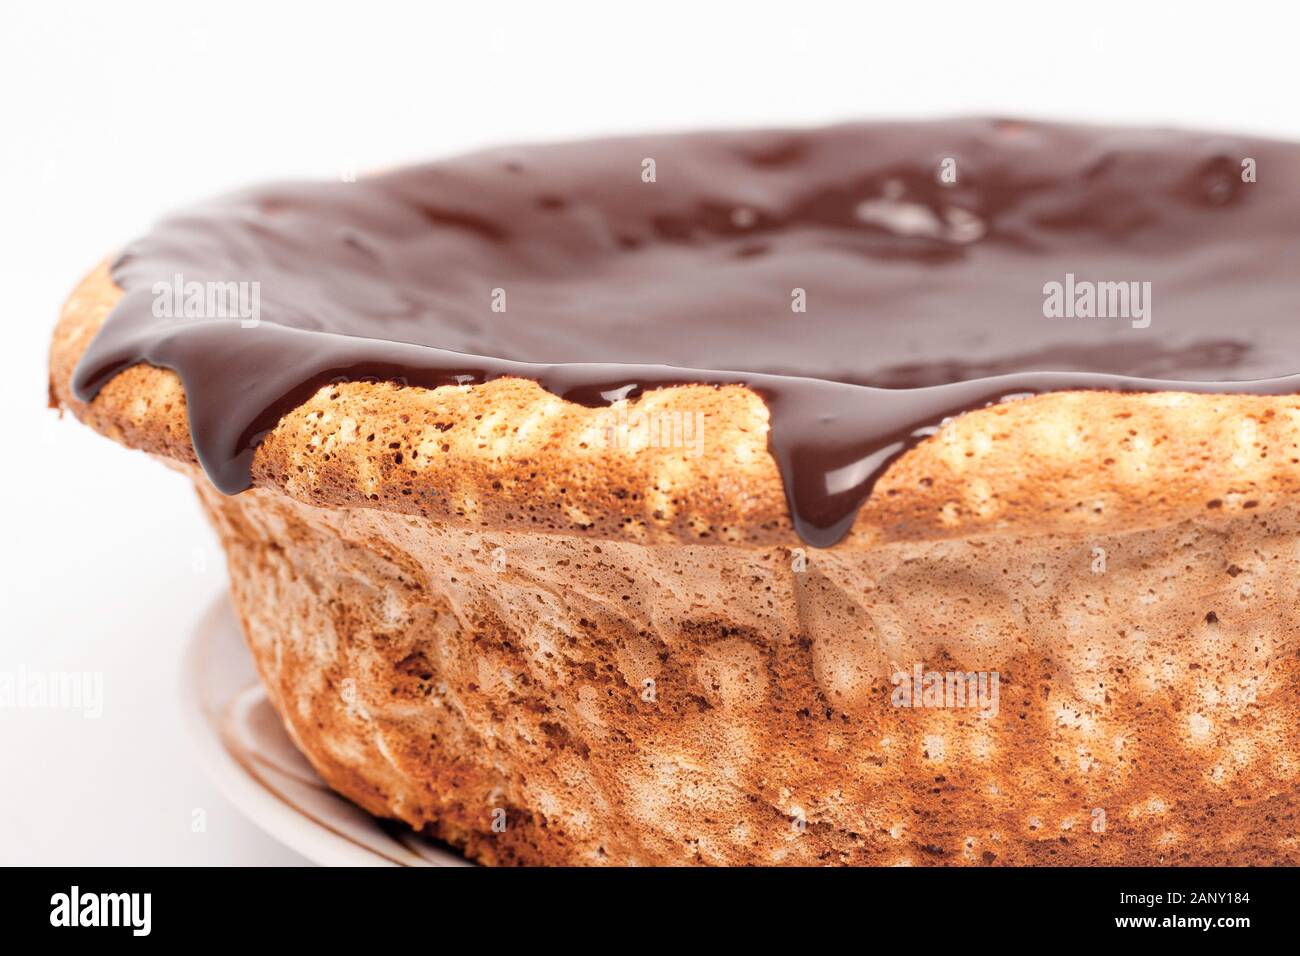 flowing chocolate on the sides of the cake. sponge cake with caramel pouring around the edges on white background close up. Stock Photo